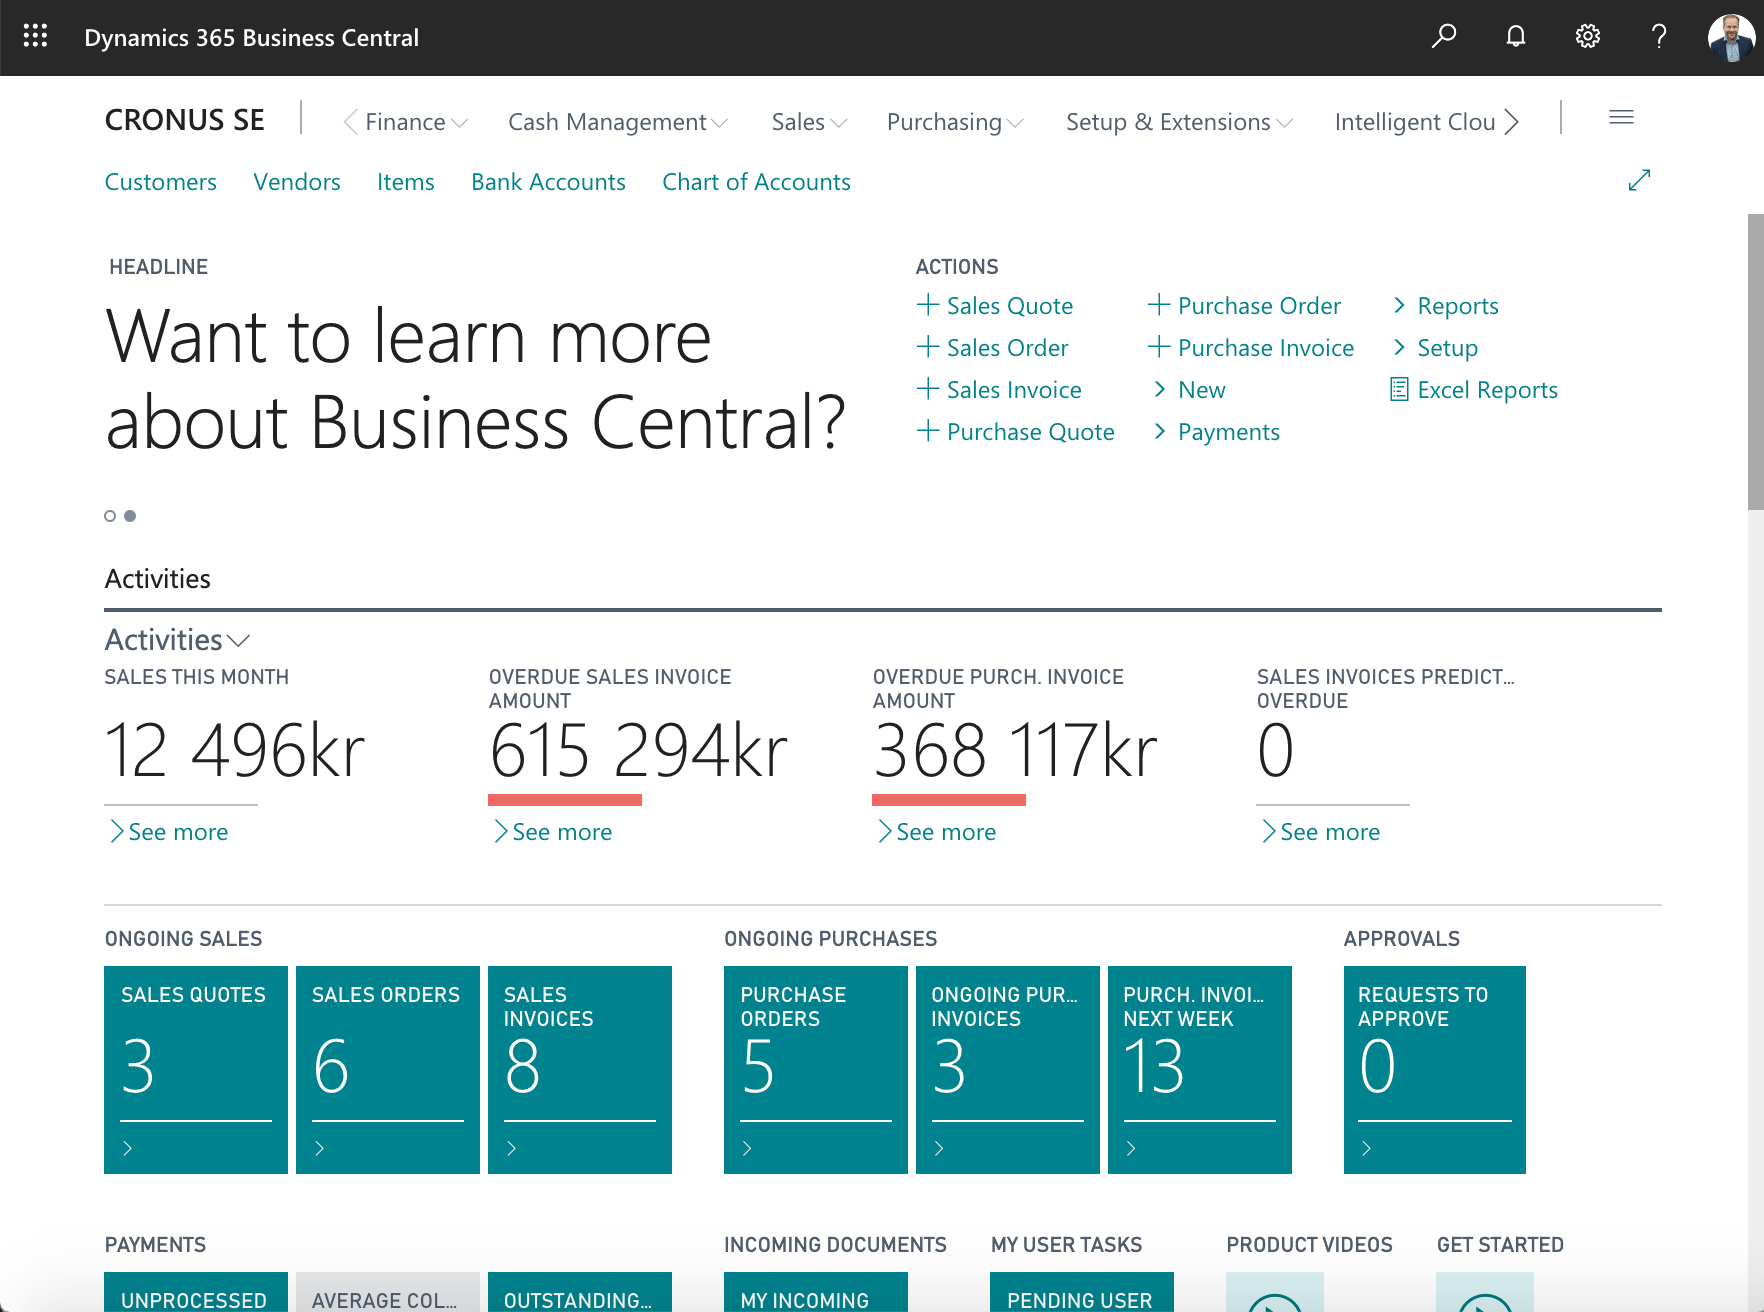 Role center Business Manager in Dynamics 365 Business Central